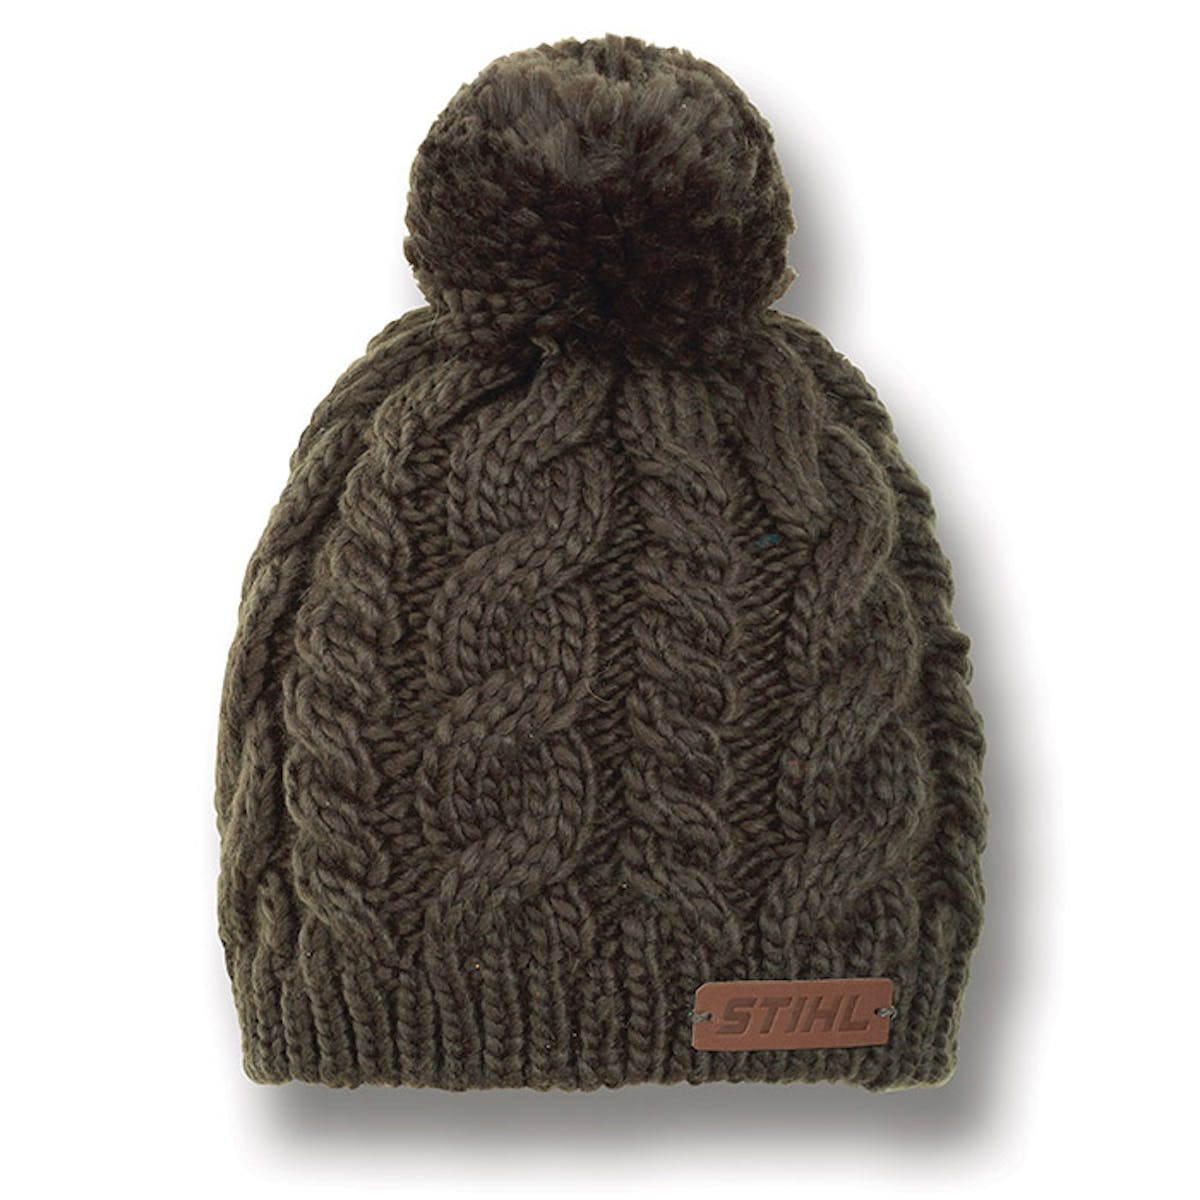 Ladies' Cable Knit Beanie